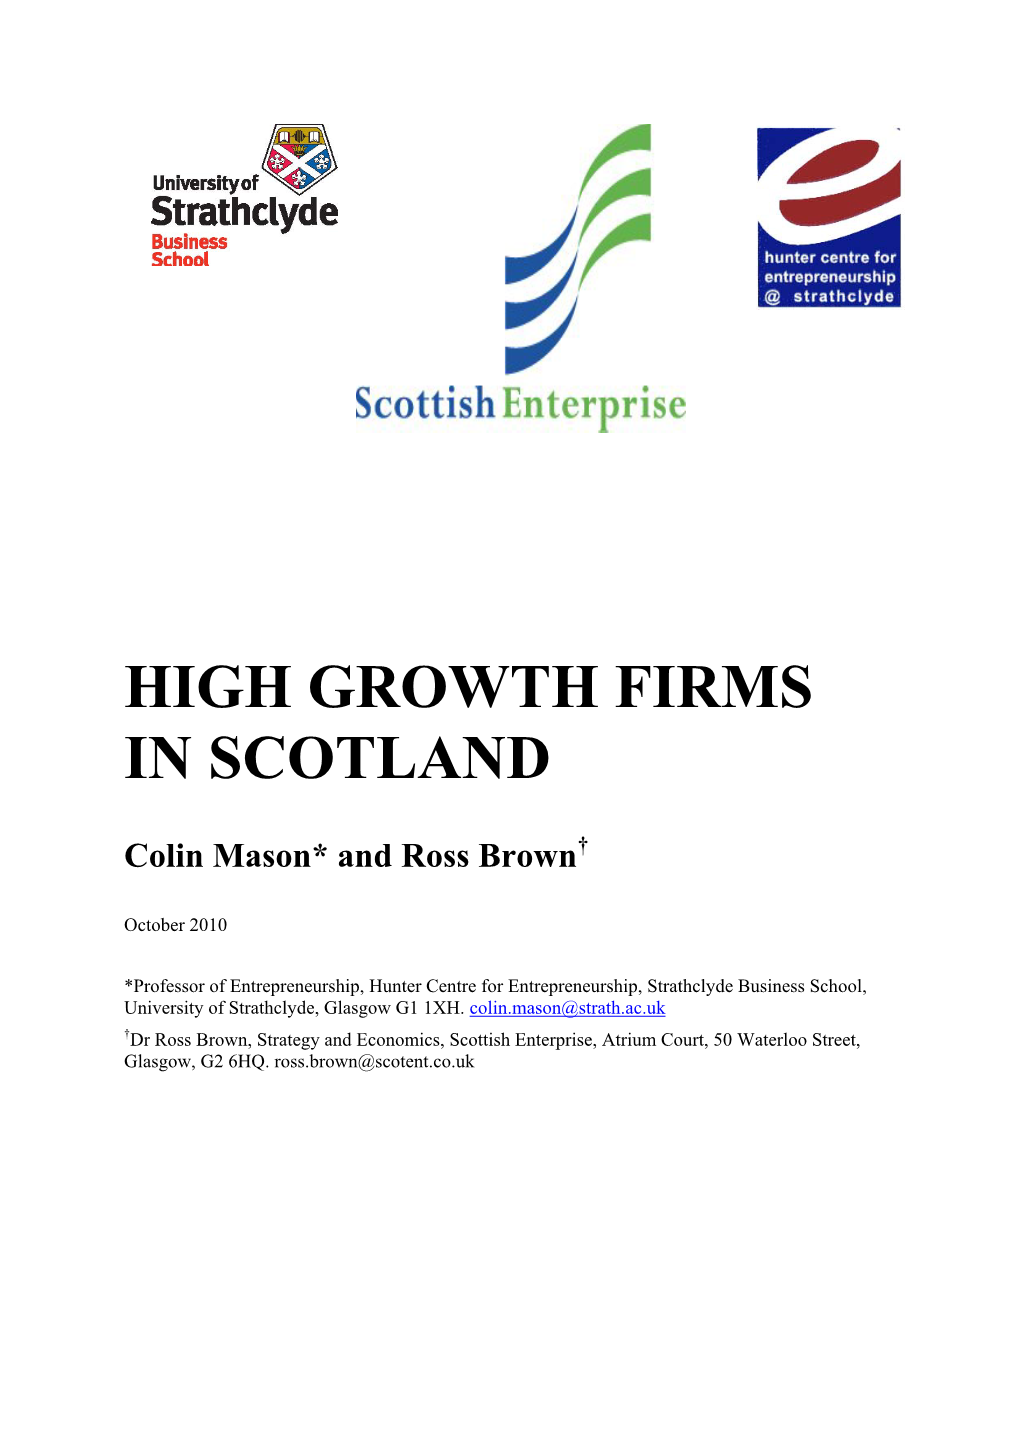 High Growth Firms in Scotland